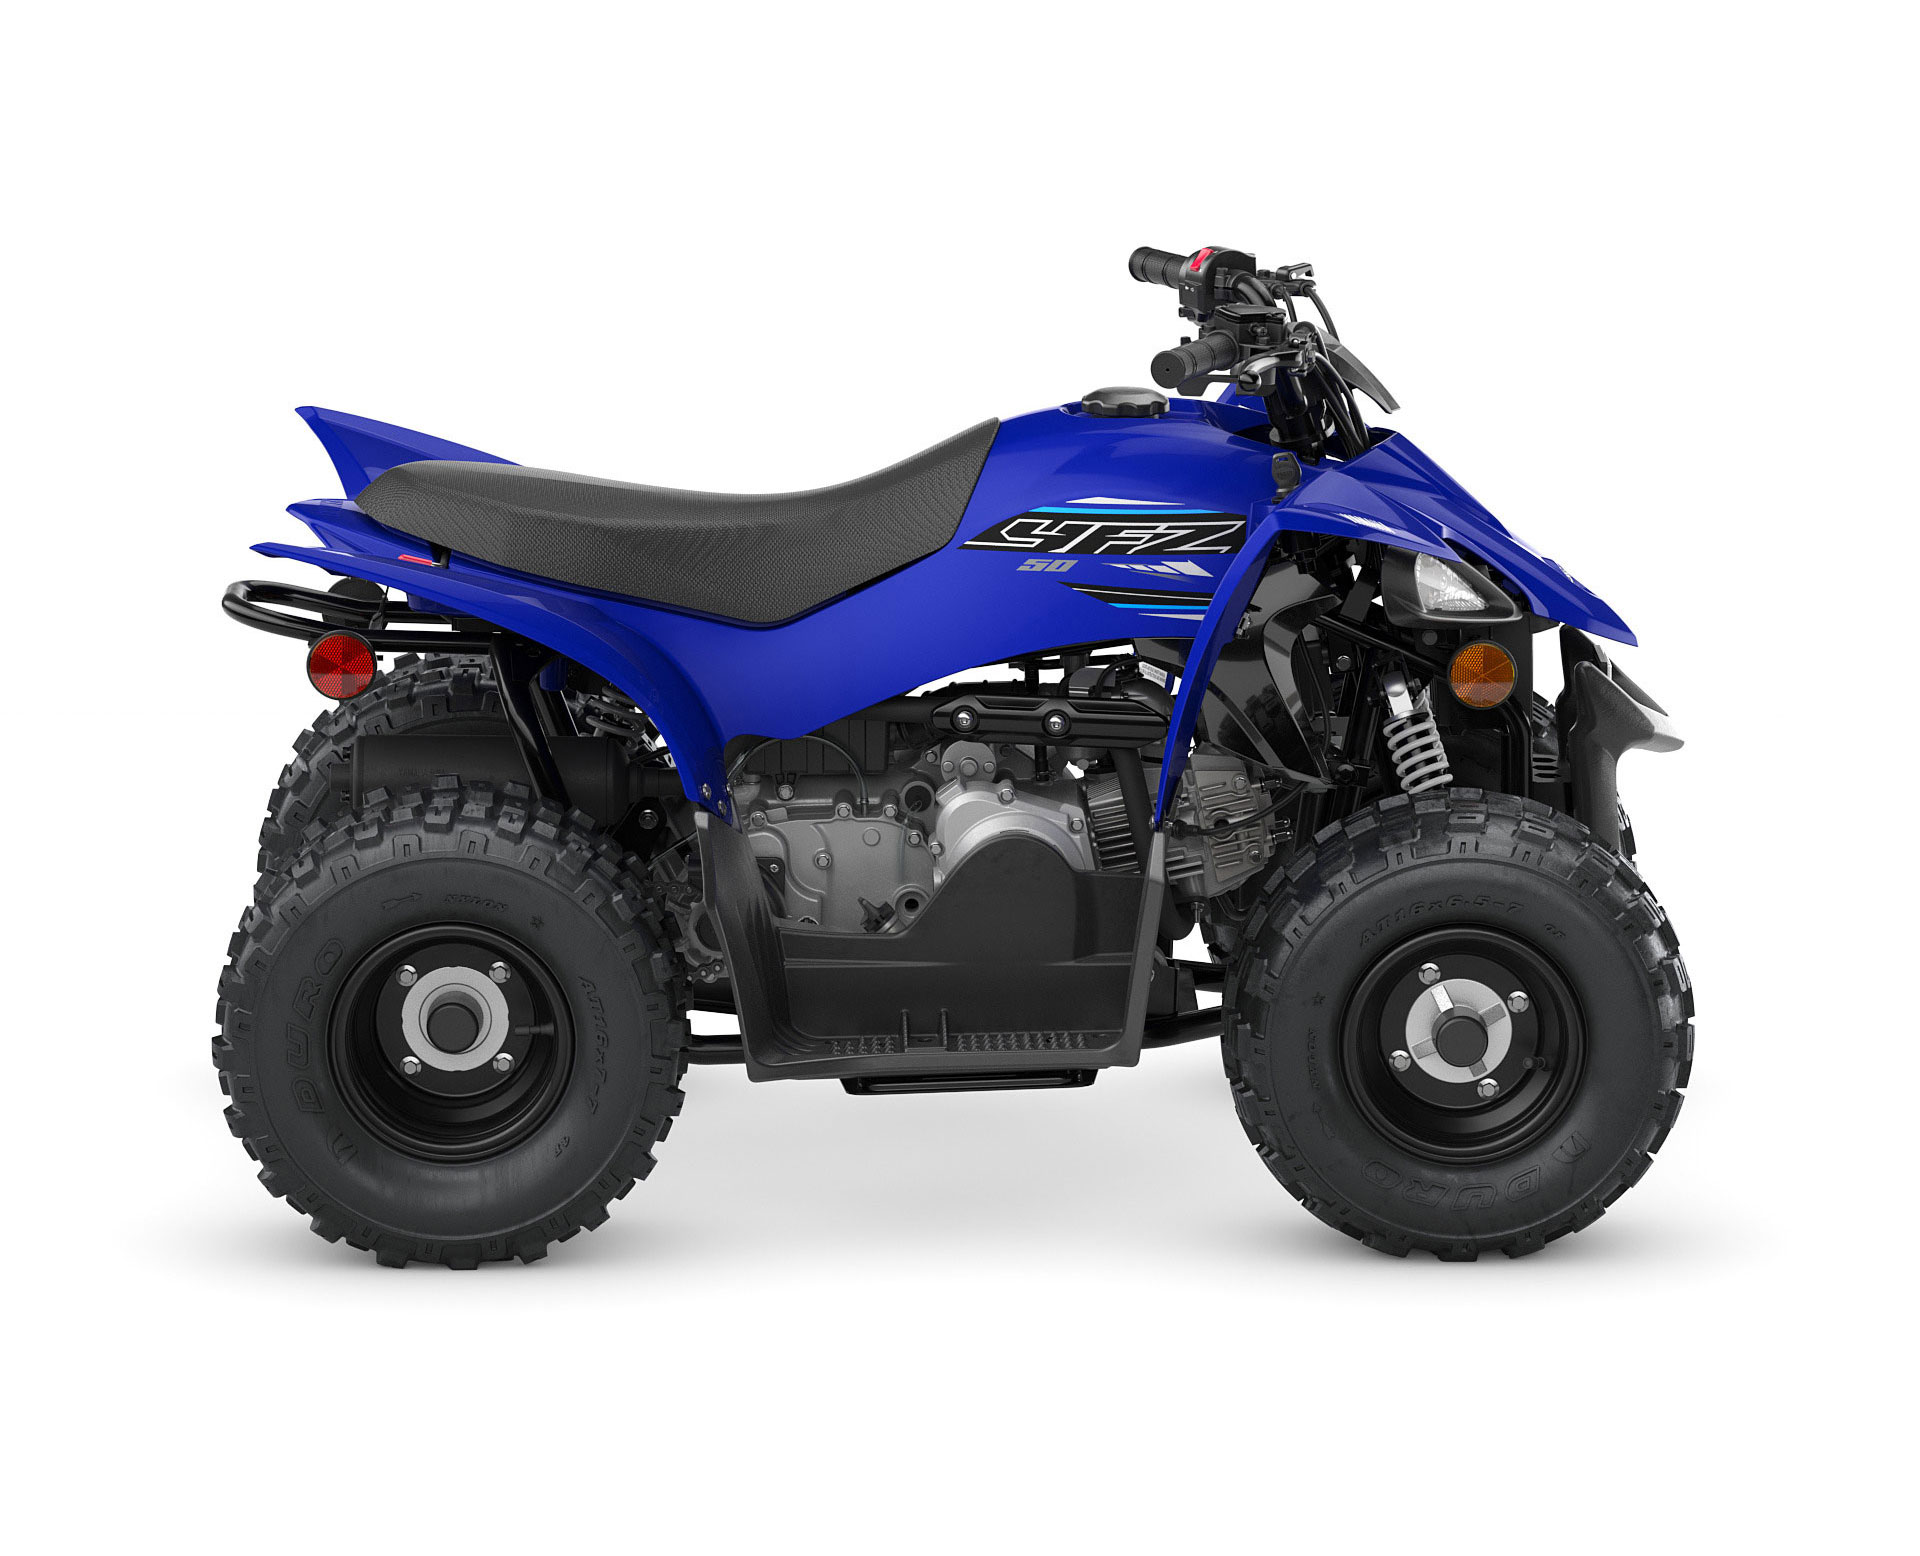 Thumbnail of your customized YFZ50 2023